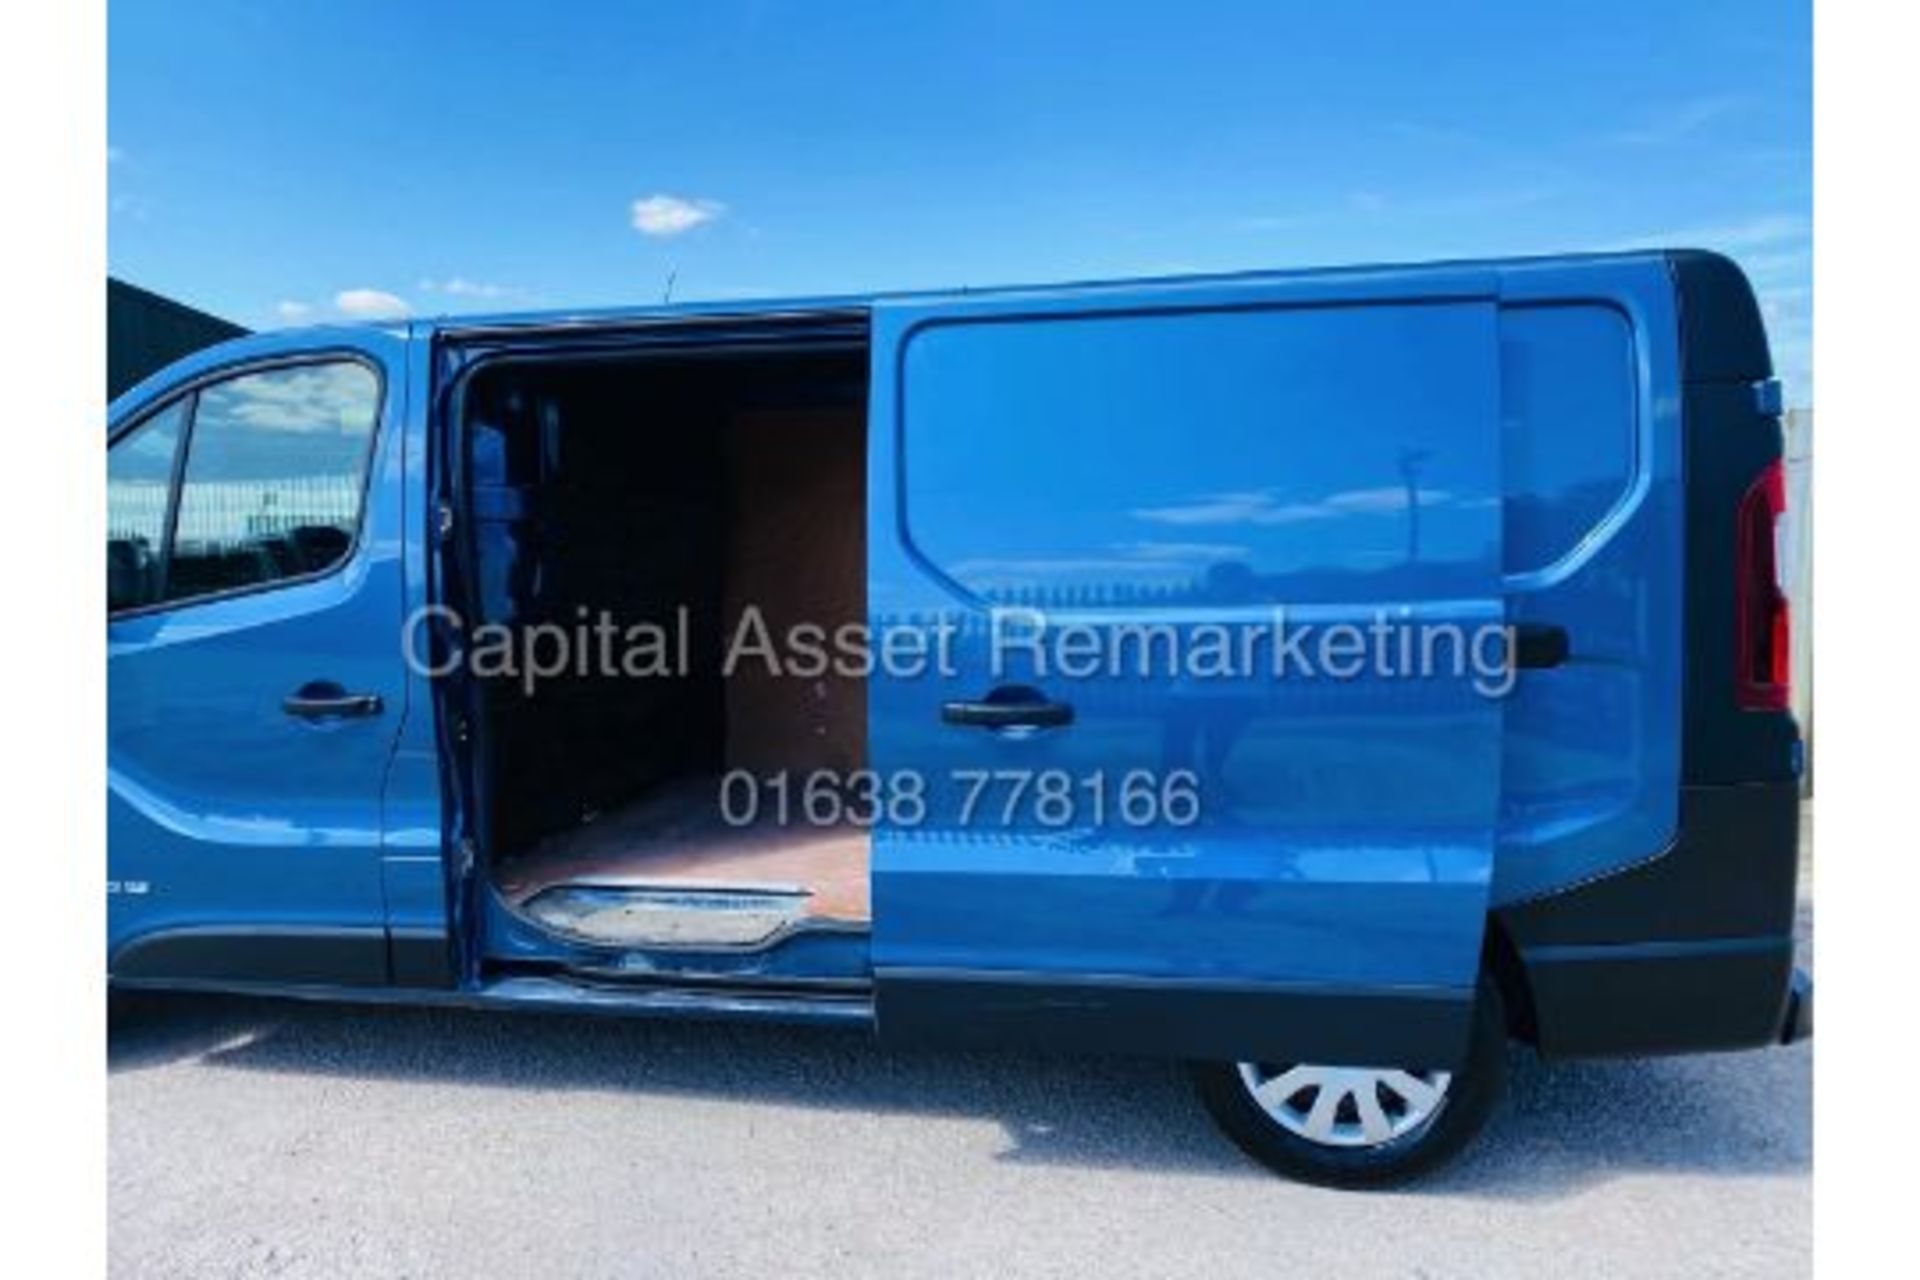 (ON SALE) RENAULT TRAFIC 1.6DCI "BUSINESS EDITION" LWB - 16 REG - AIR CON - MET PAINT - ELEC PACK - Image 10 of 21